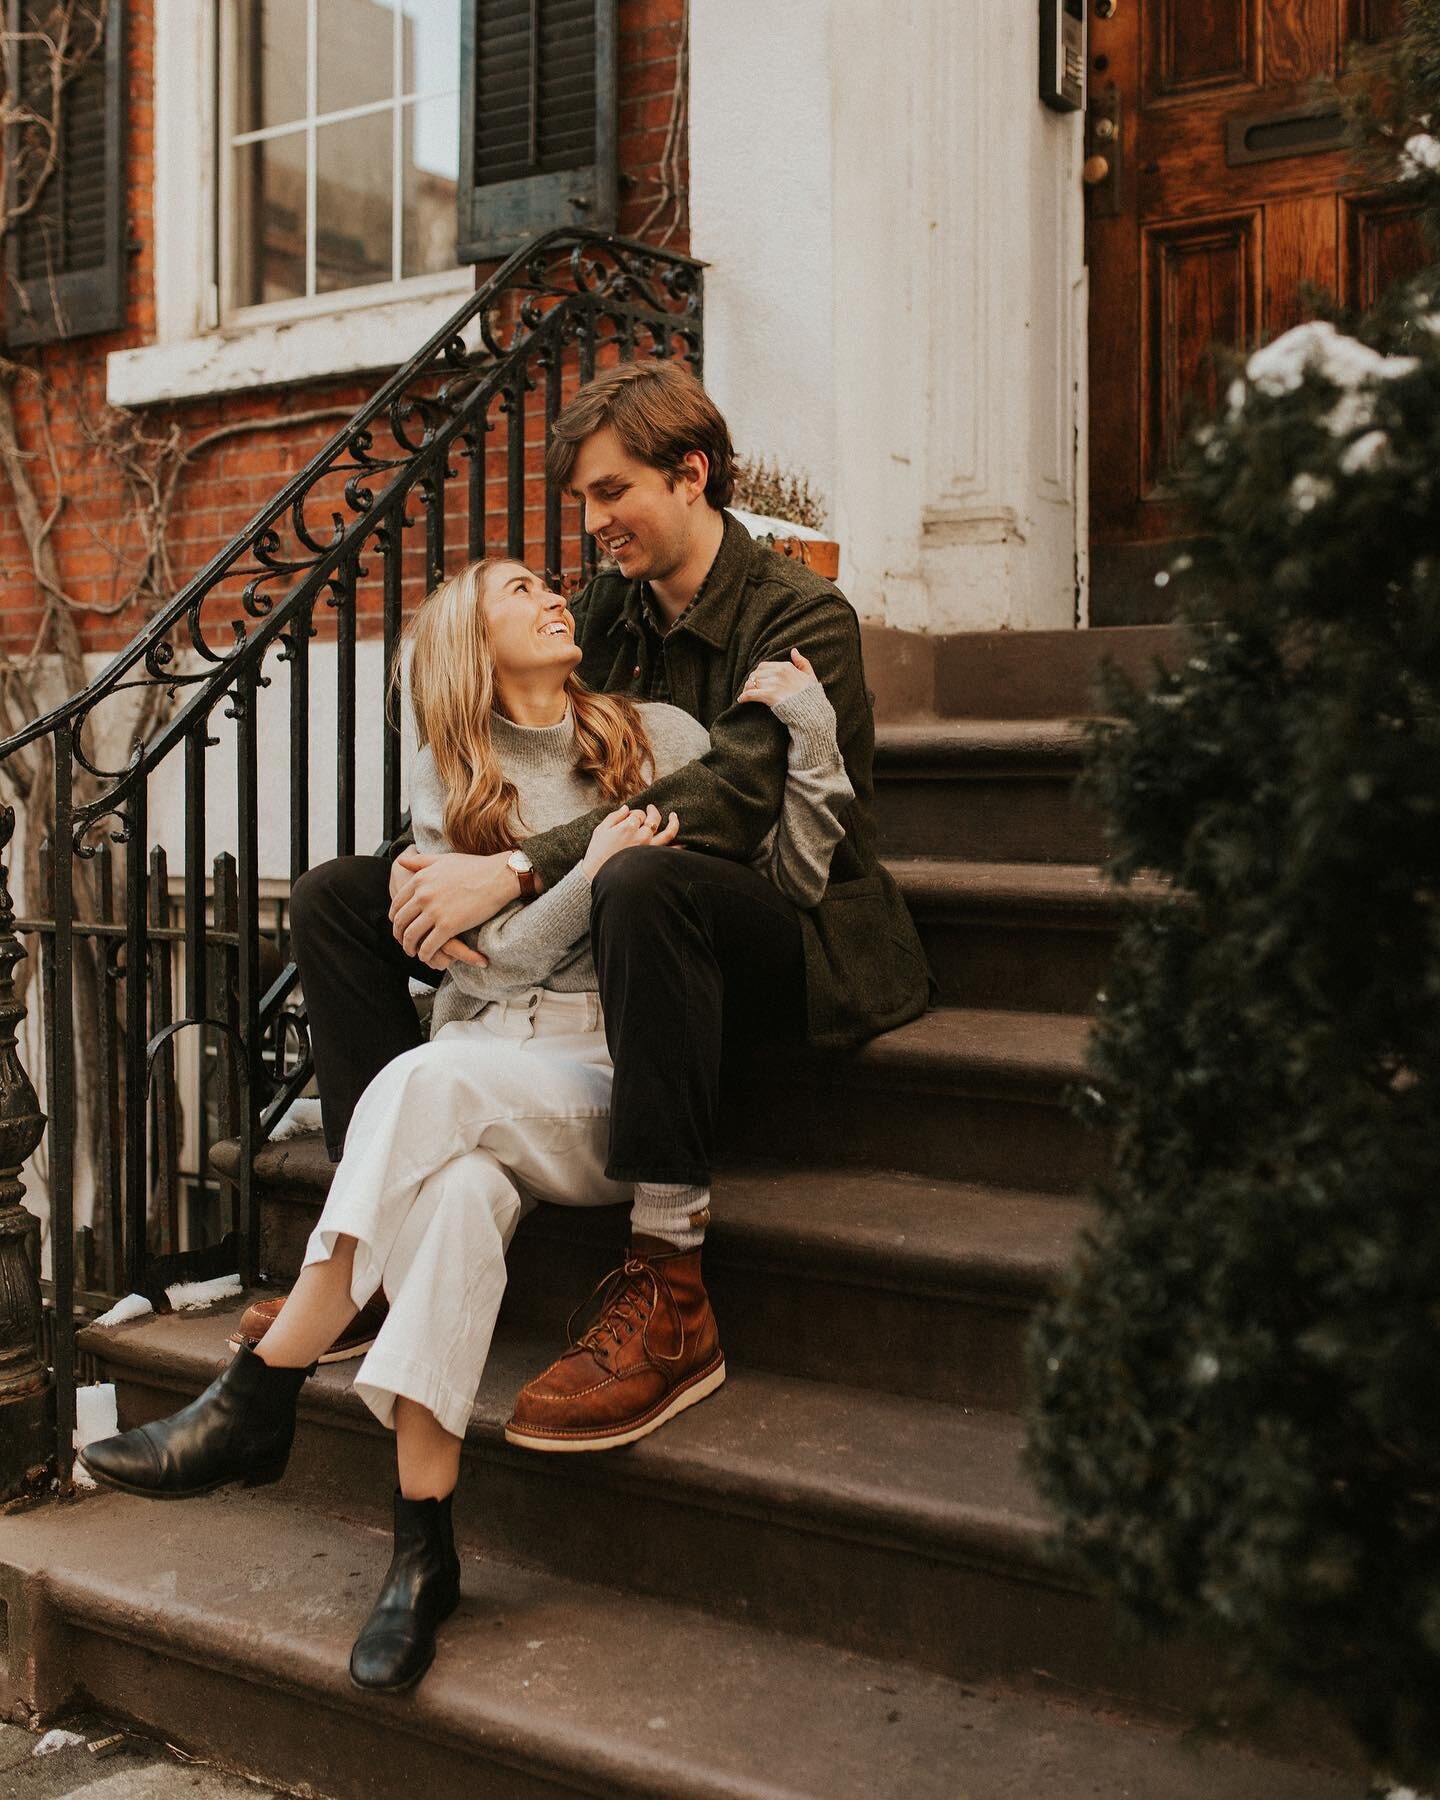 Interrupting my normal feed for some engagement photos of my own! 😍 Thanks to my lovely friend @jennacavphoto for capturing some dreamy digital + film photos in our favorite spots in the city 😭❤️